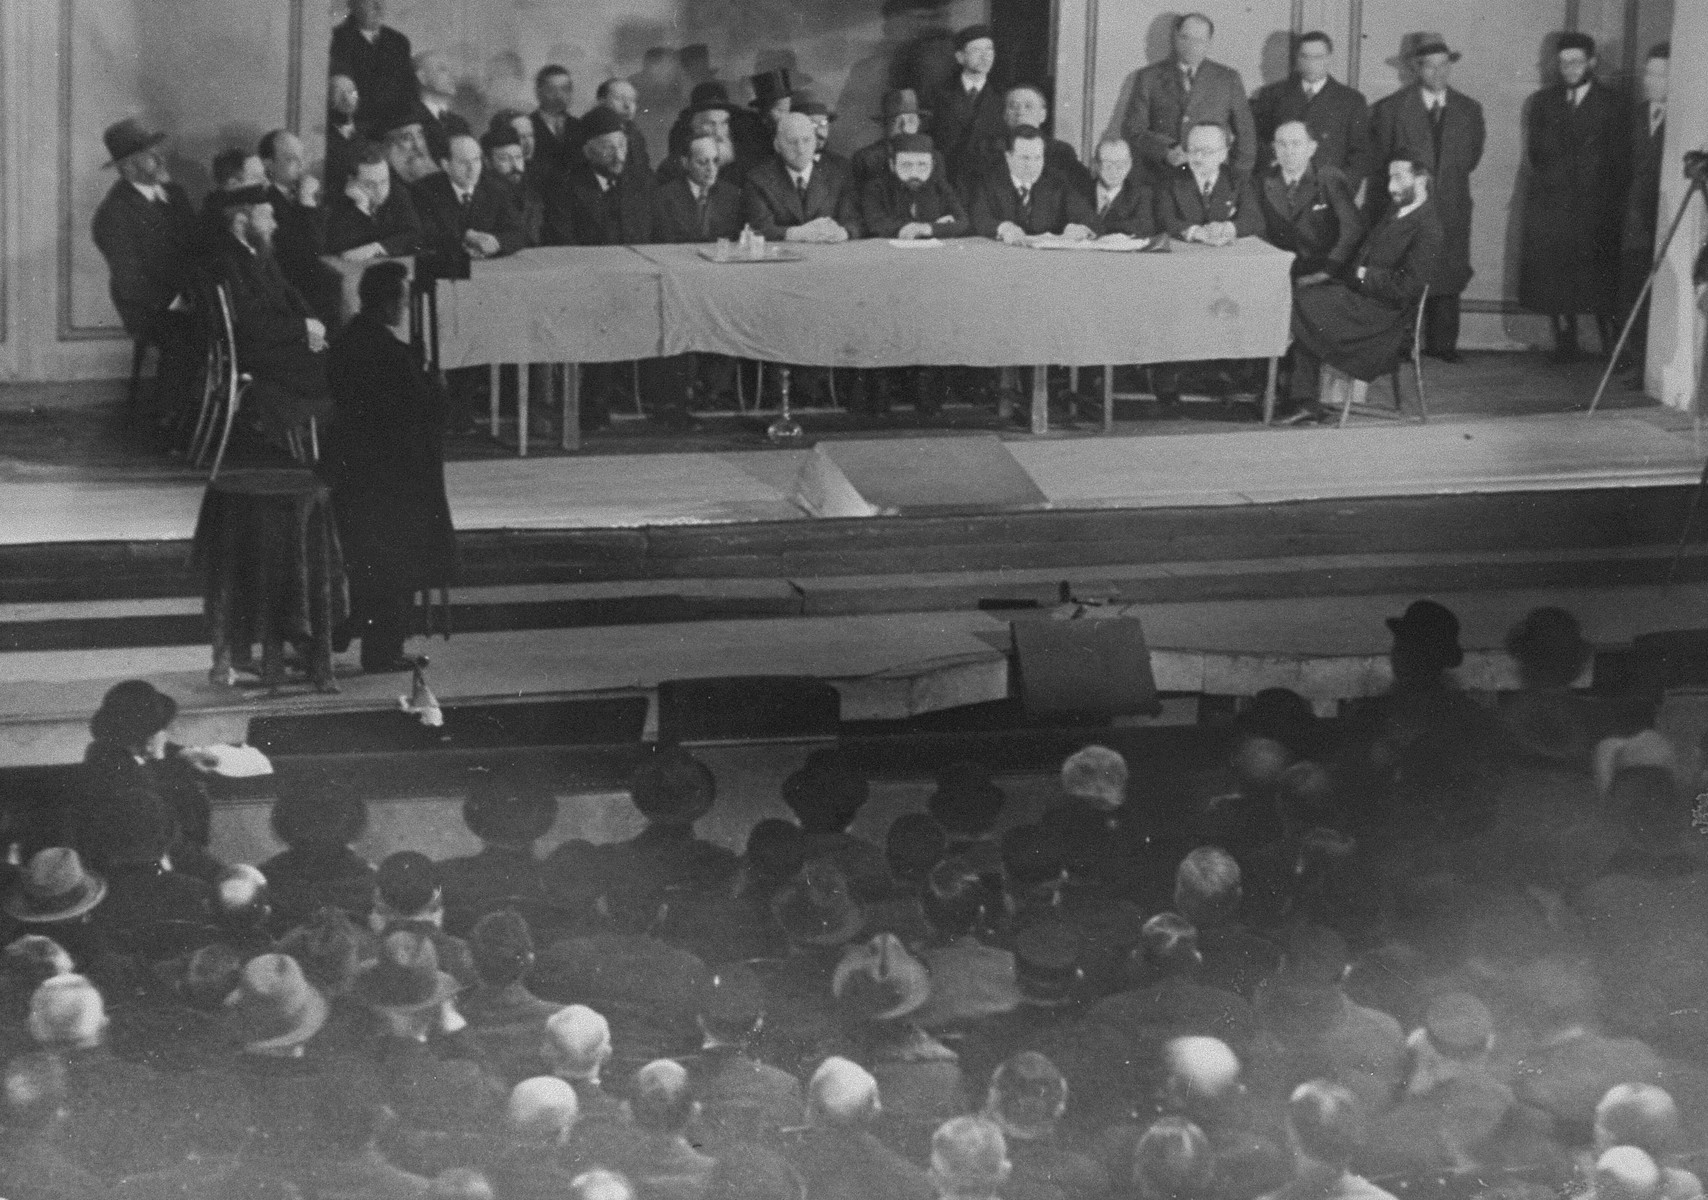 View of the speakers' podium during a public meeting to protest the enactment of anti-Jewish legislation by the Nazi regime in the Jewish Theater in Warsaw.